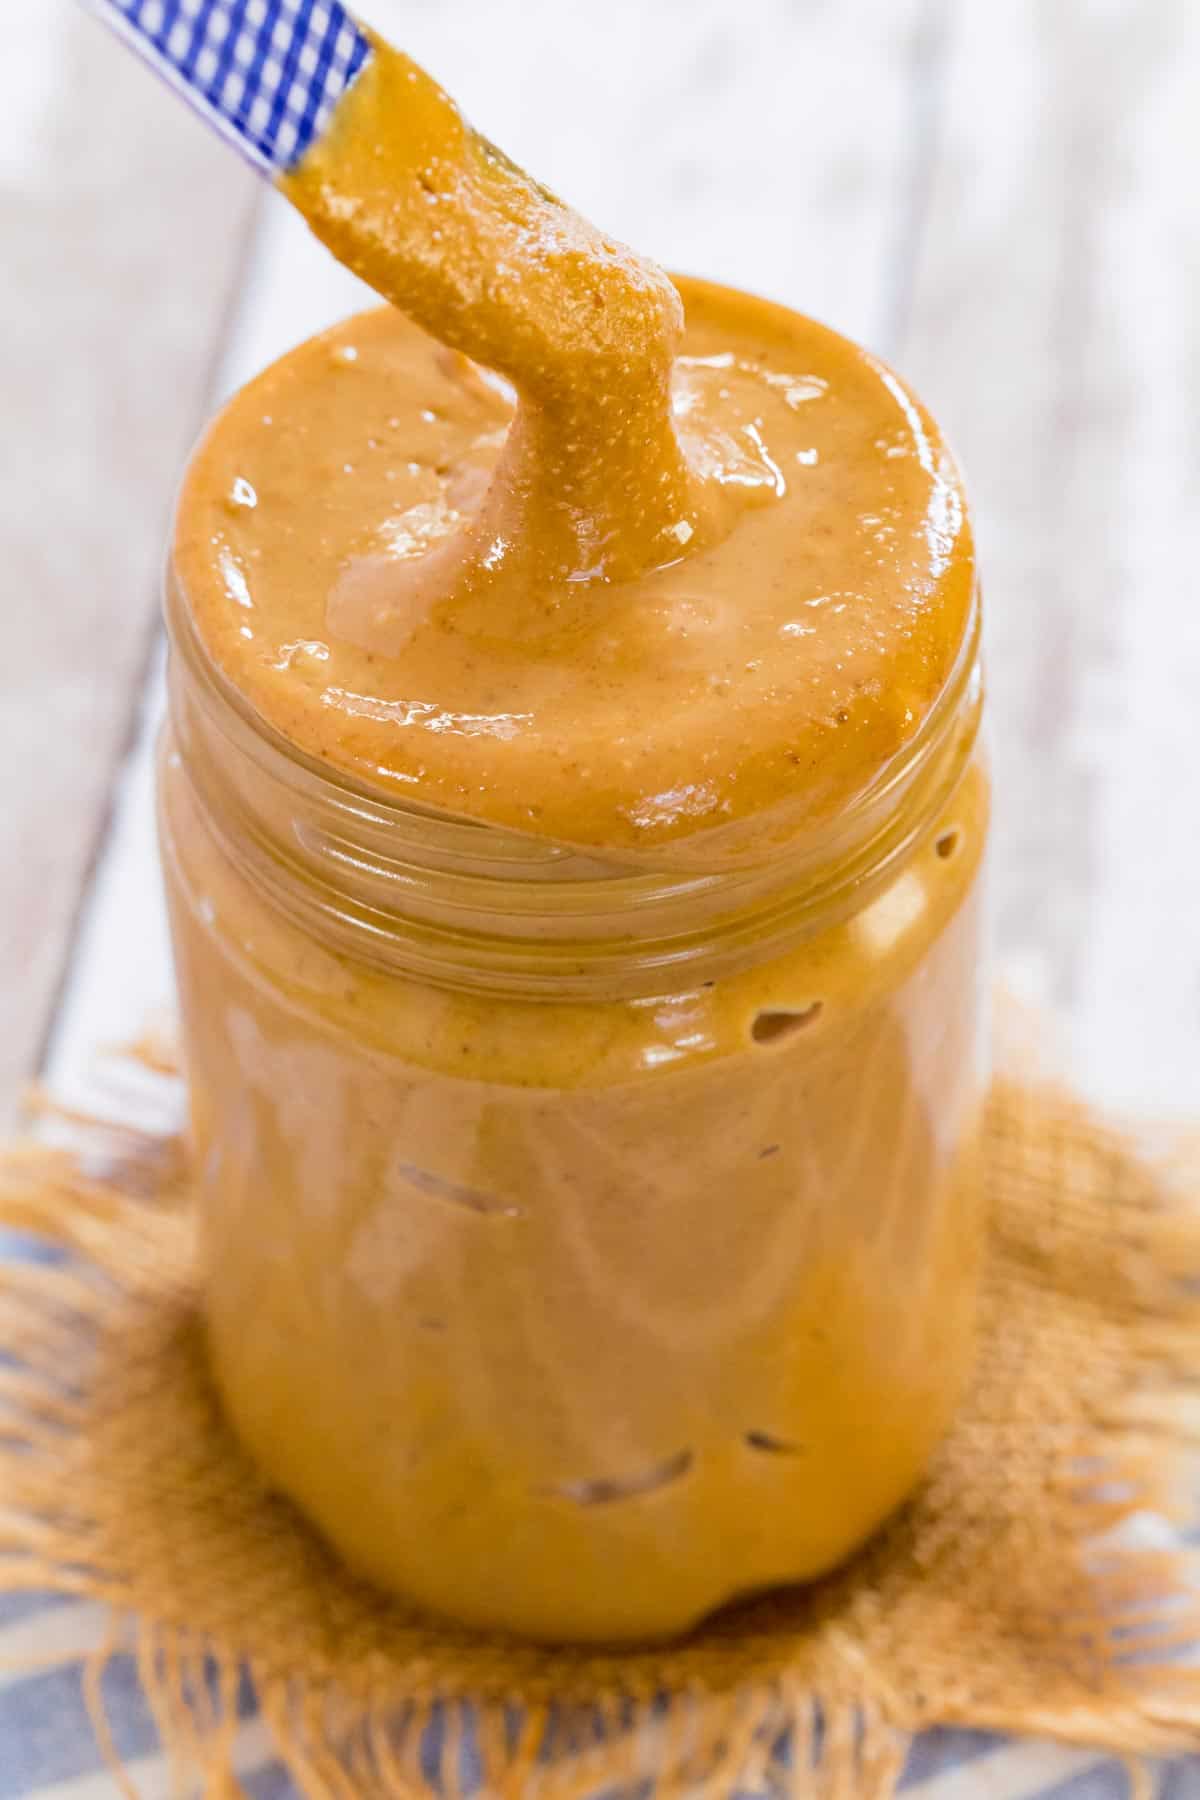 A knife being dipped into a jar of peanut butter.